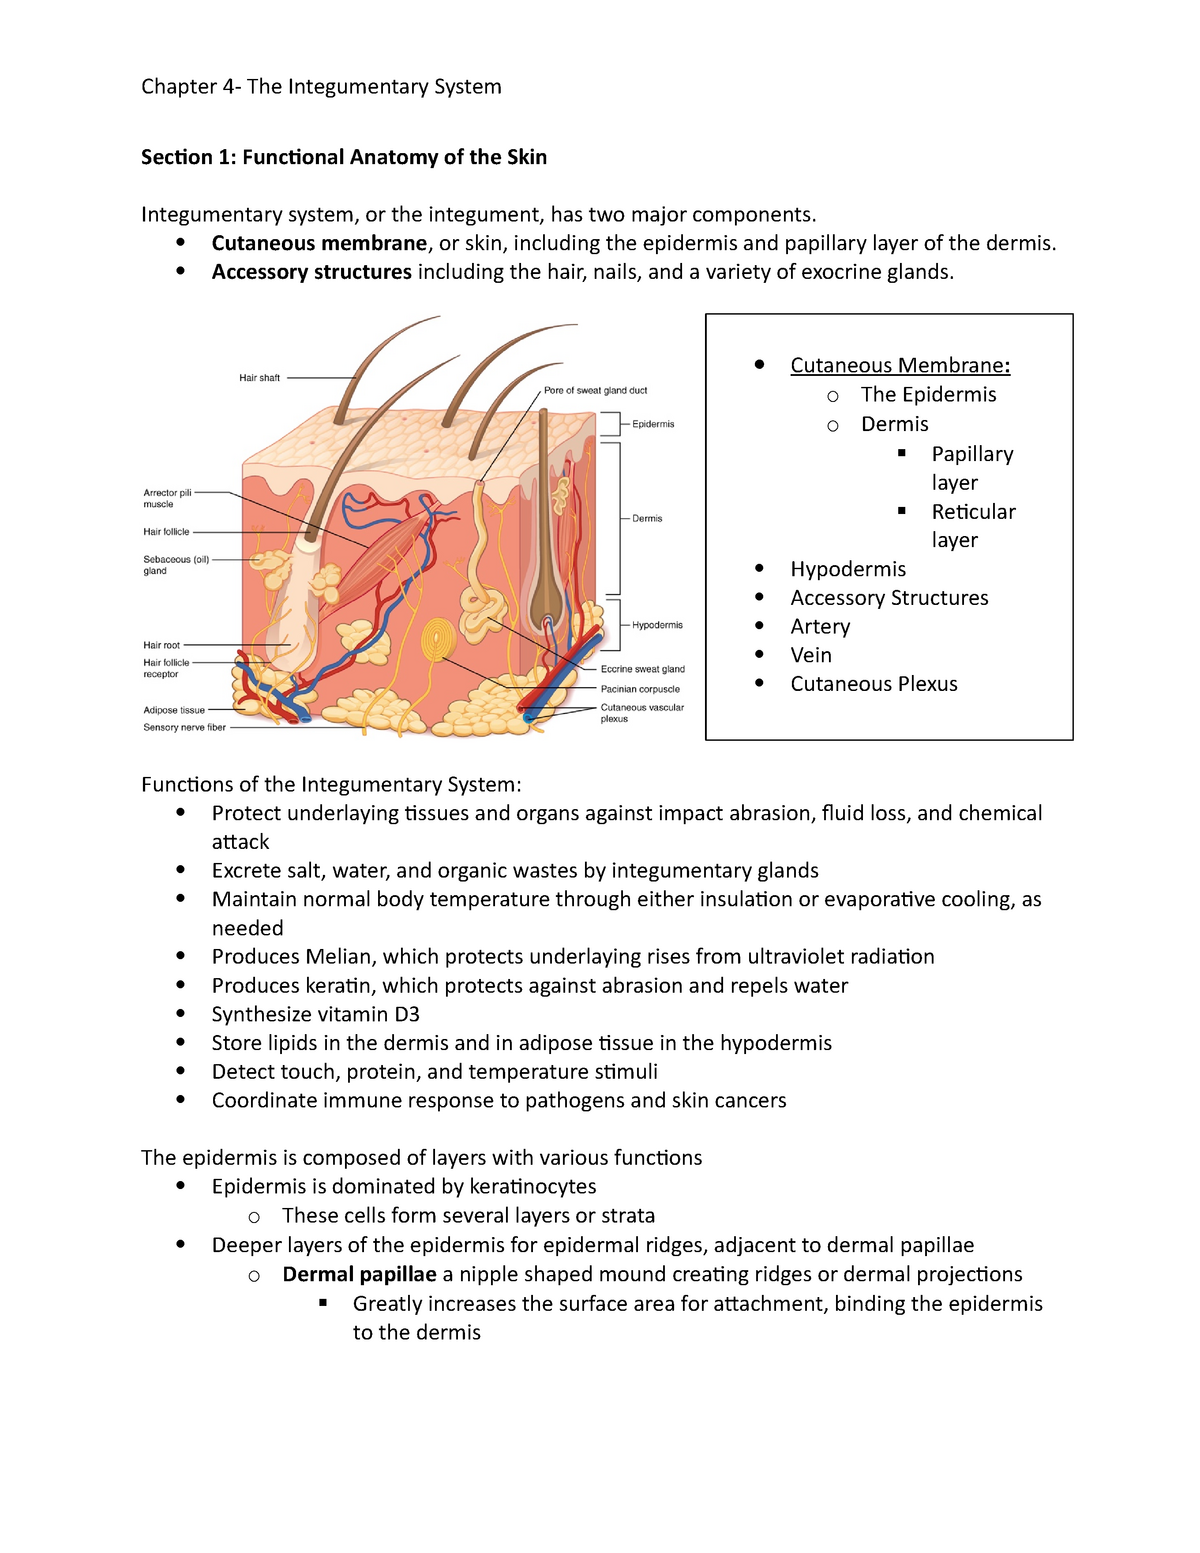 Chapter 22- The Integumentary System - Section 22: Functional Within Integumentary System Worksheet Answers